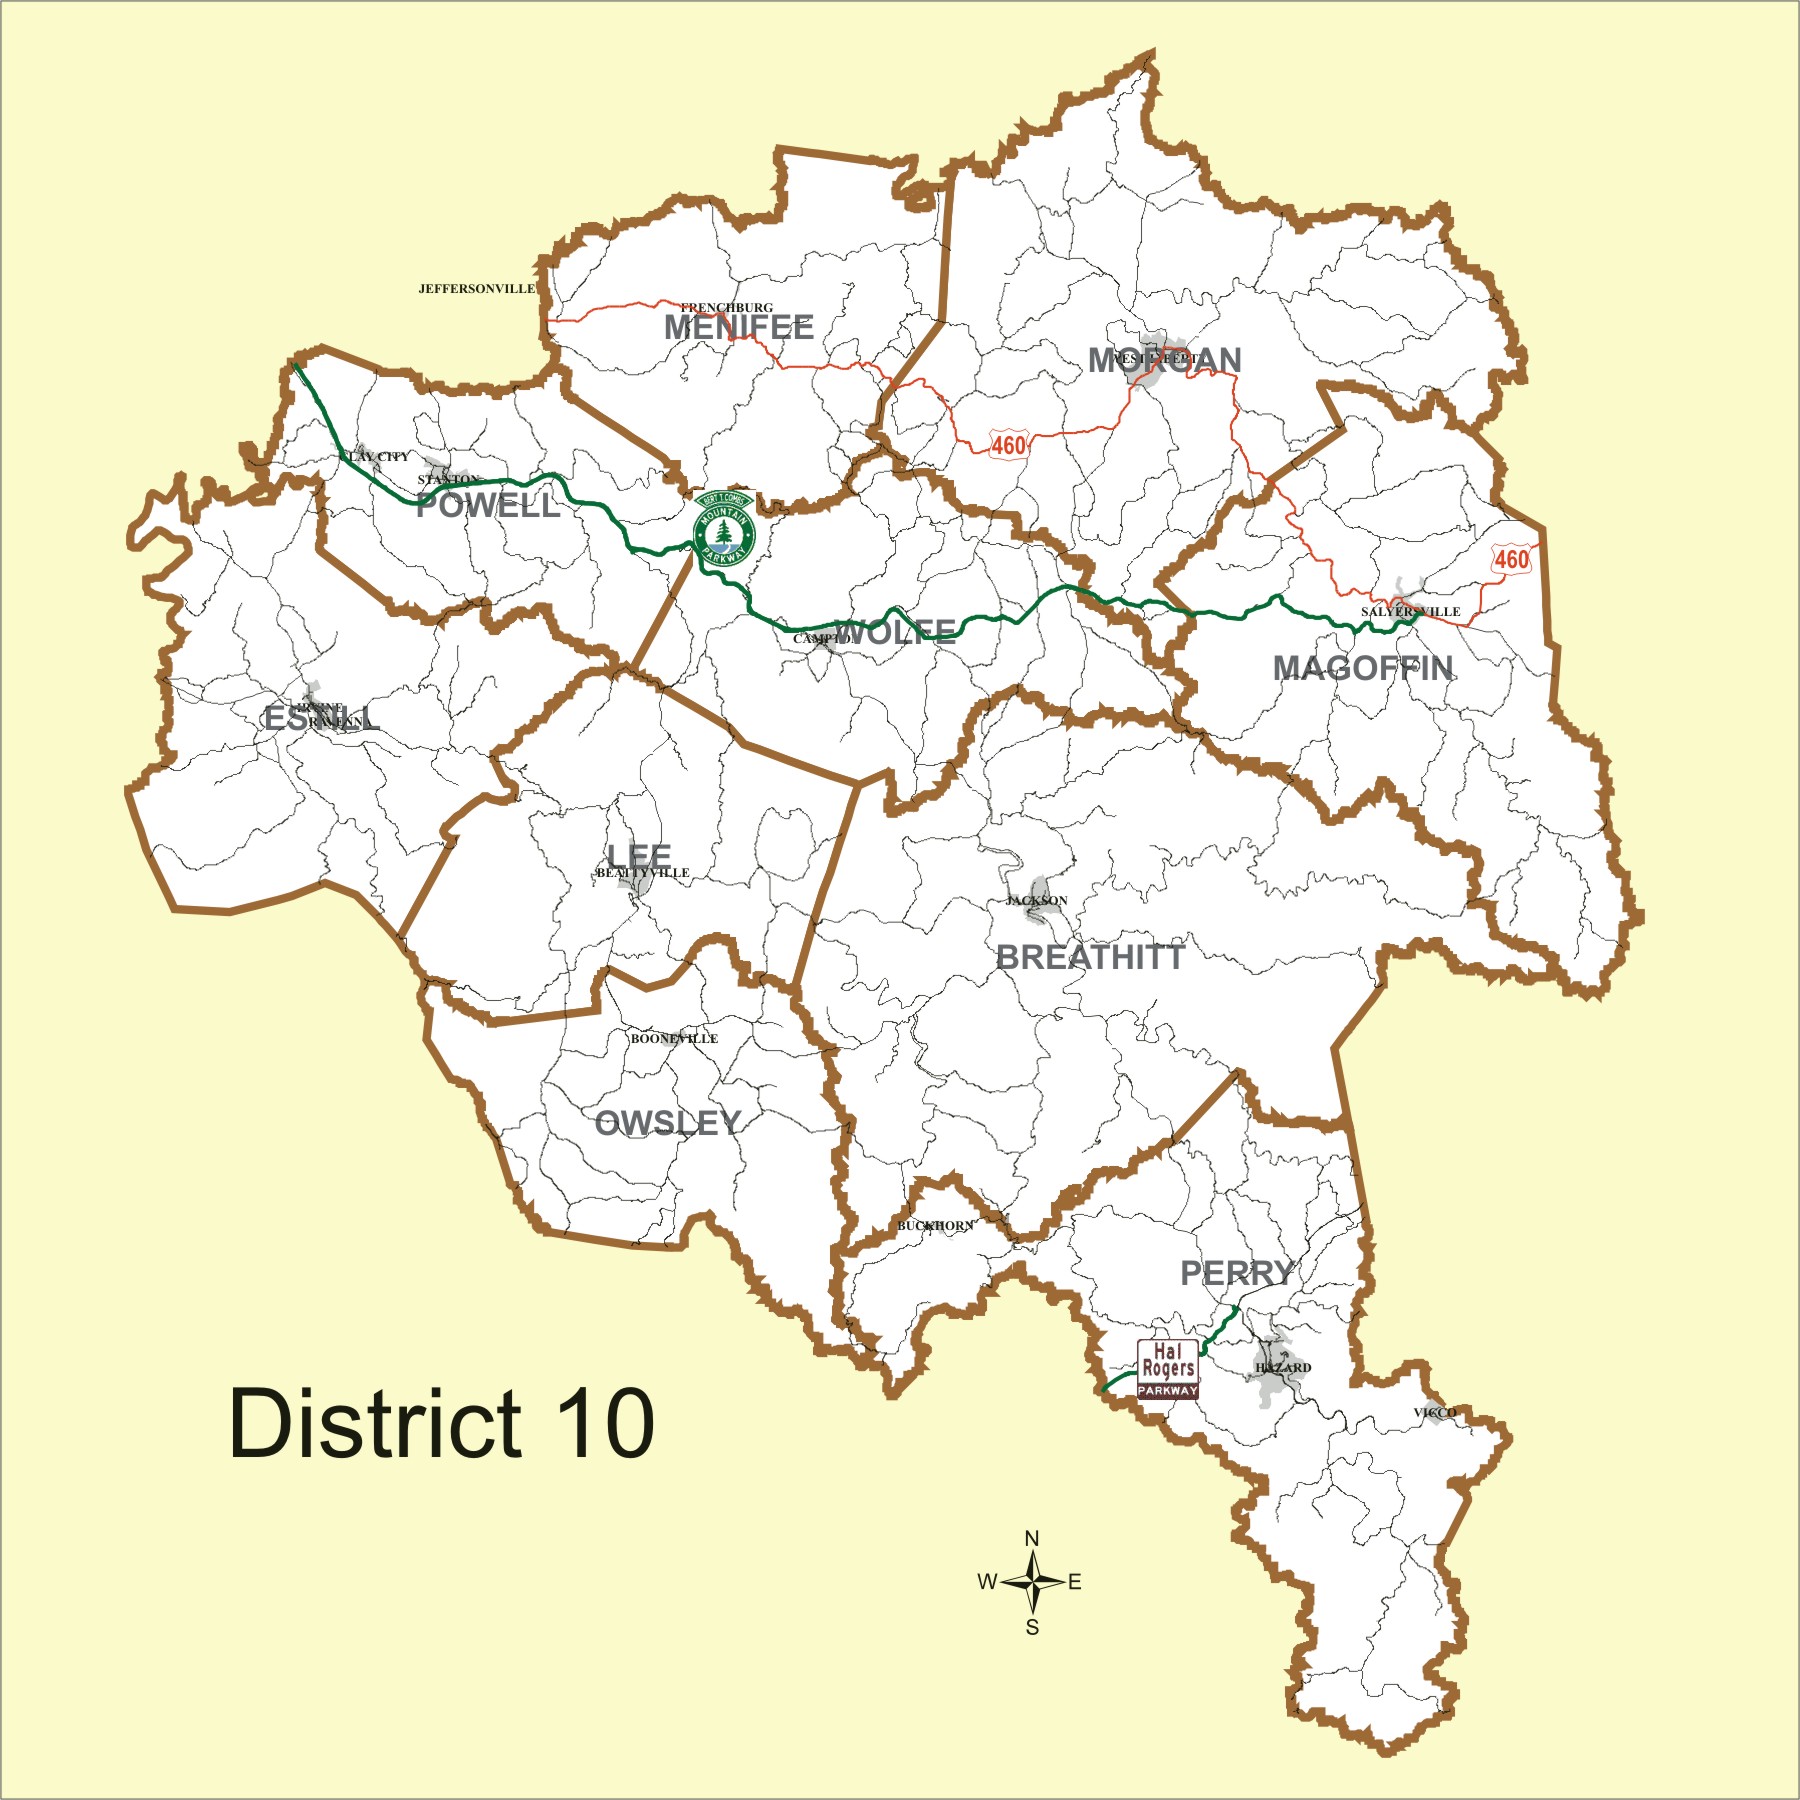 Map of District 10 counties